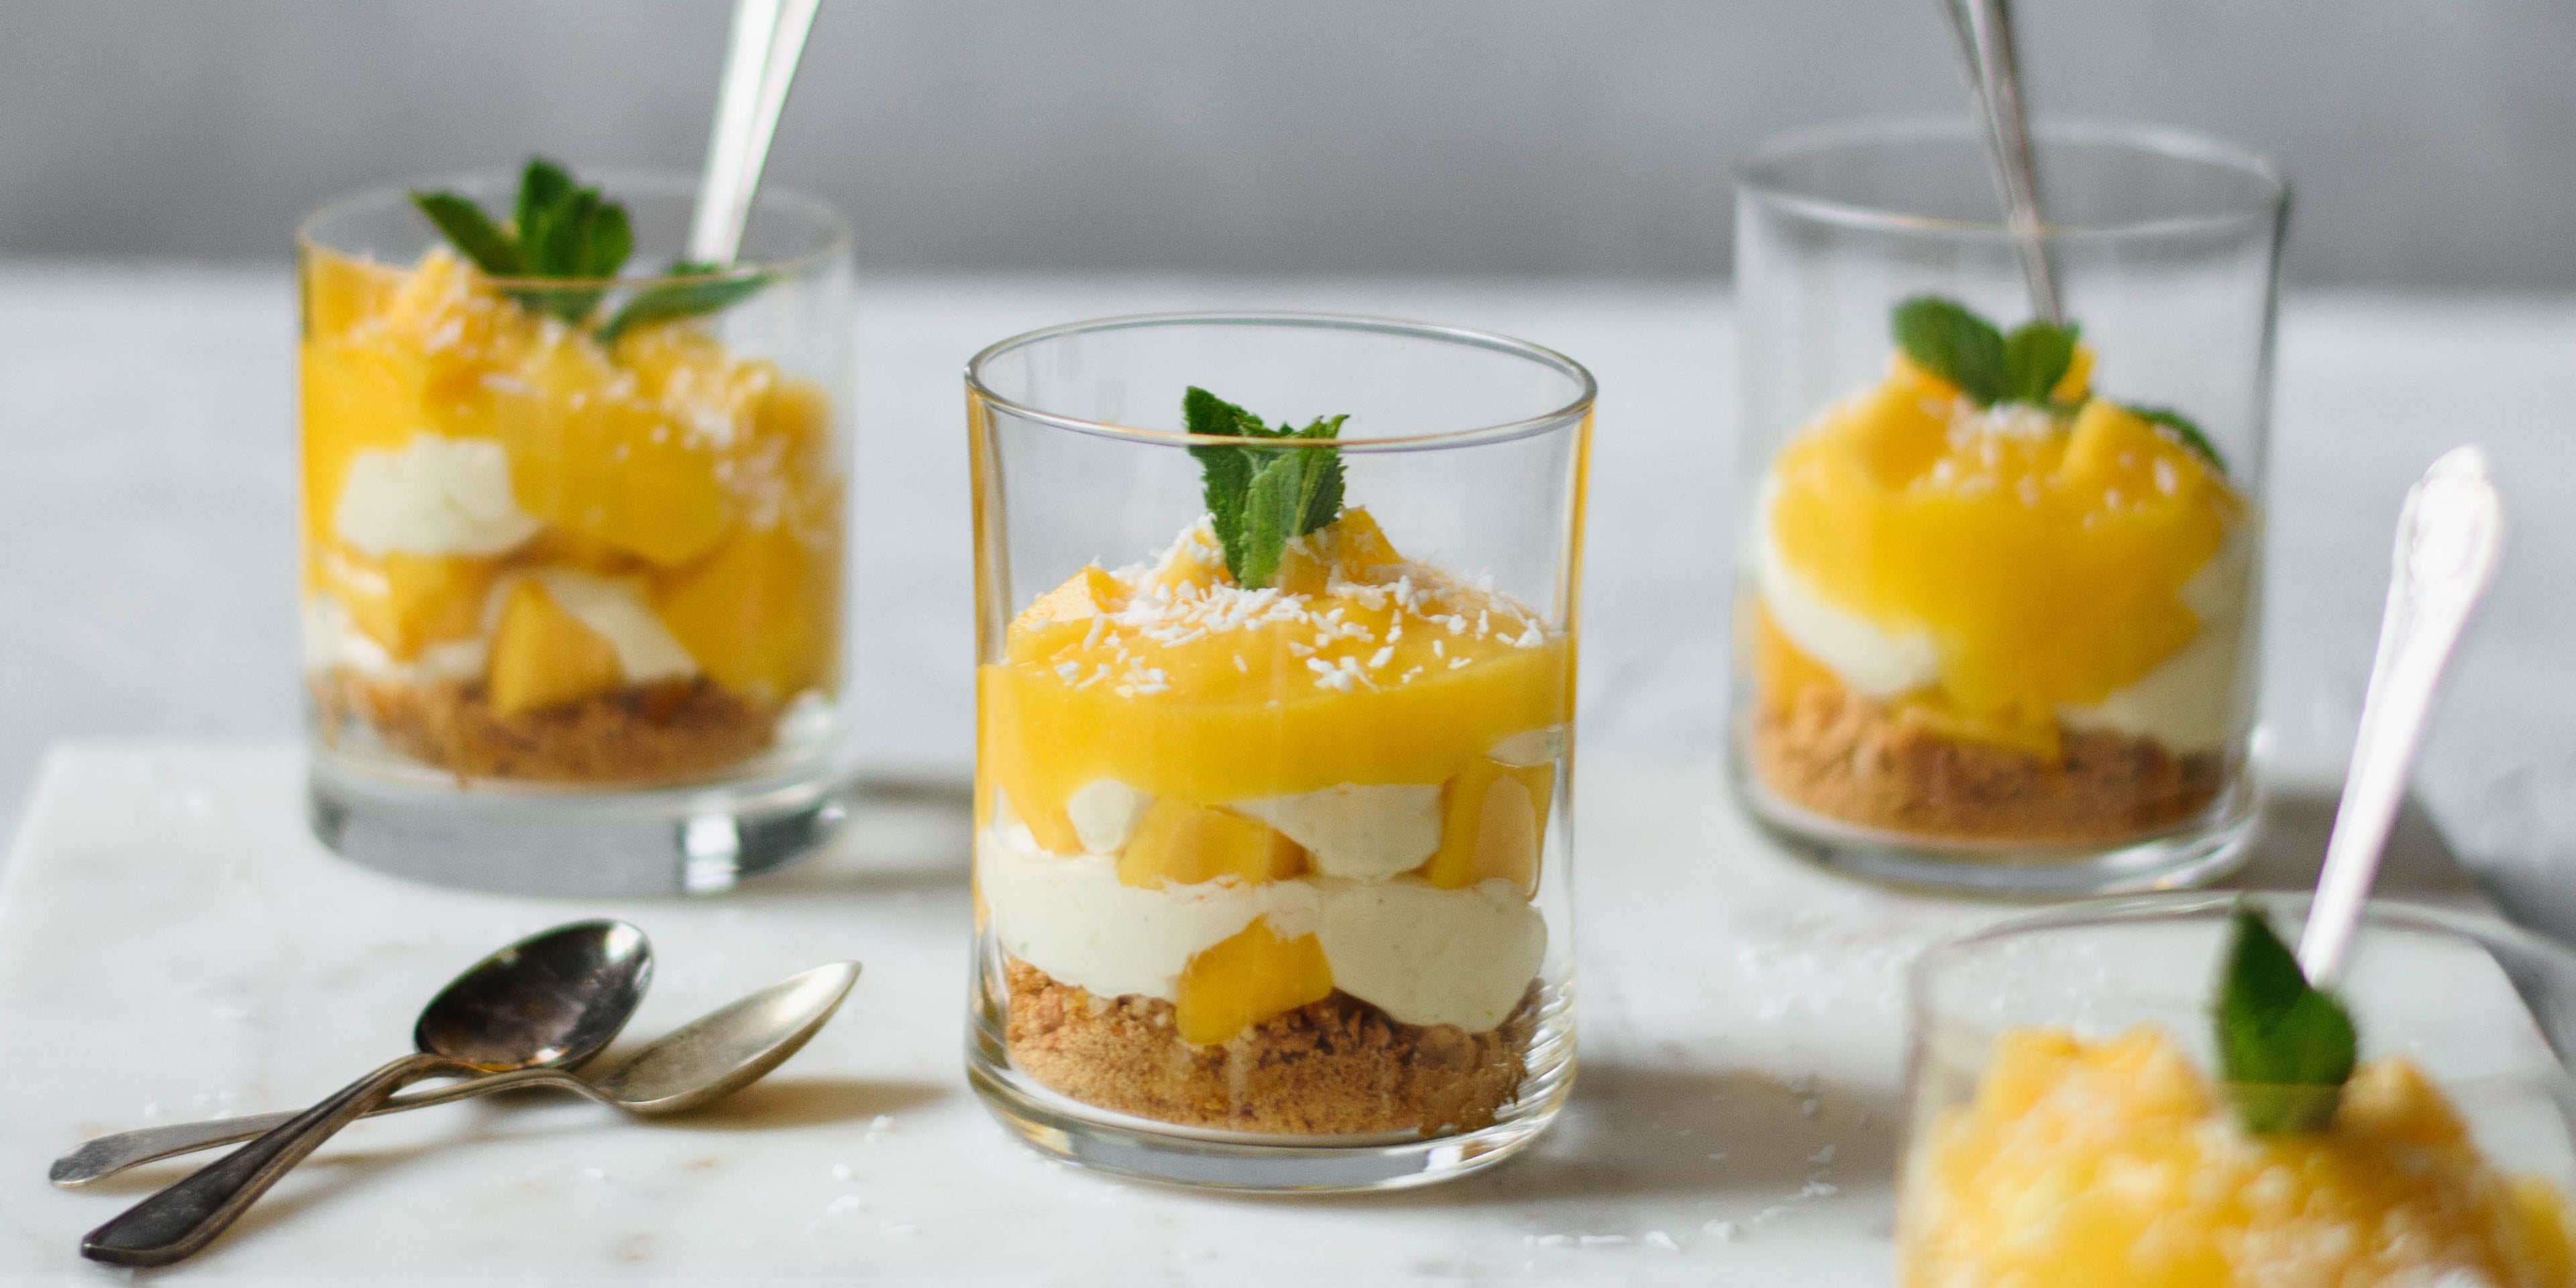 3 small glasses of mango syllabub with spoons in and sprig of mint on top. Two spoons on the side